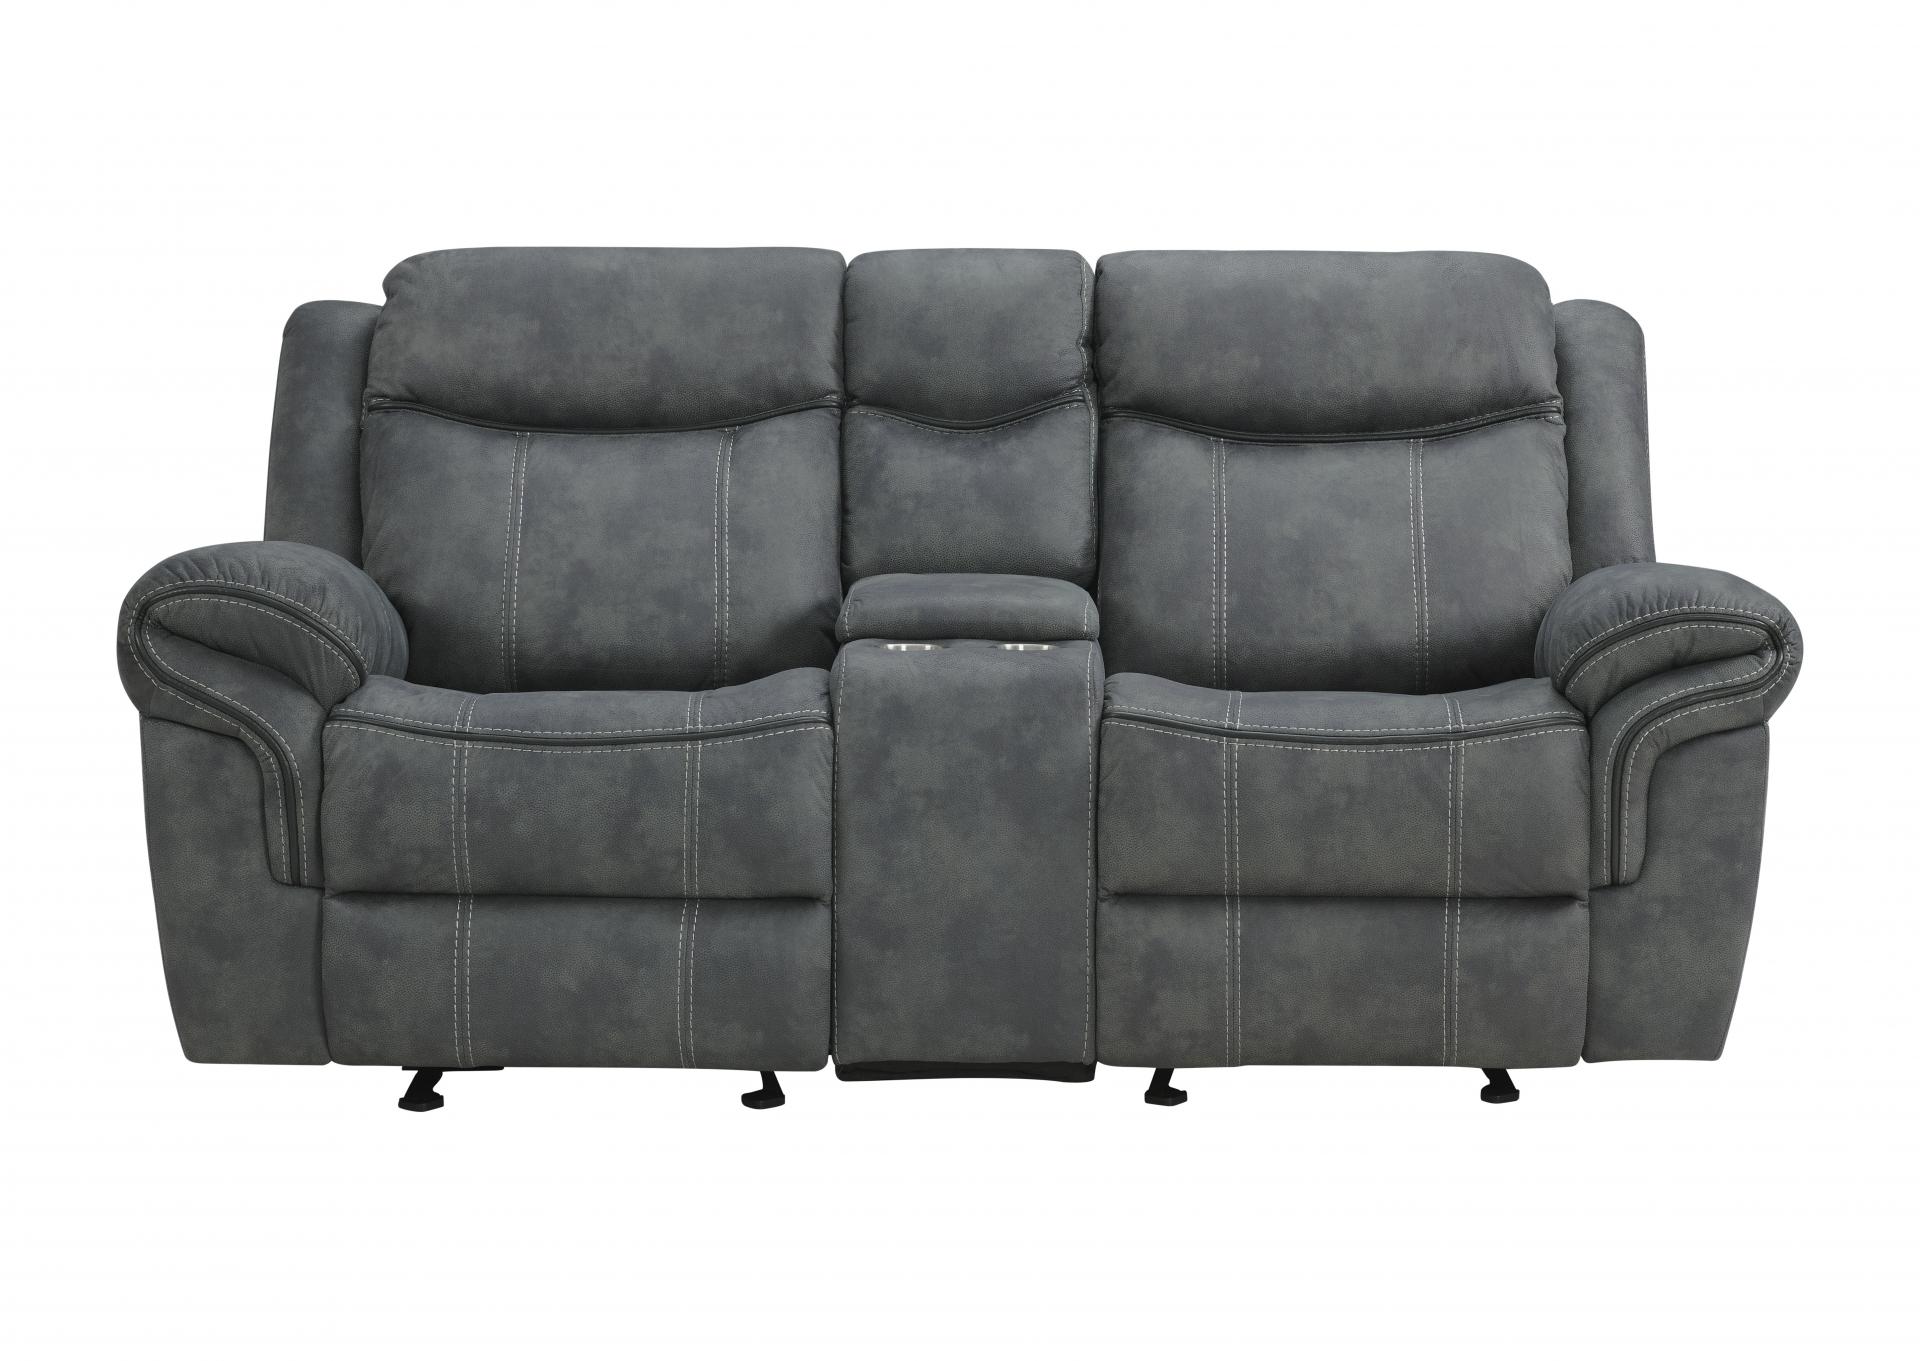 Pierce Dual Reclining Sofa with drop down tray and pull out drawer and Dual Reclining Loveseat with Console